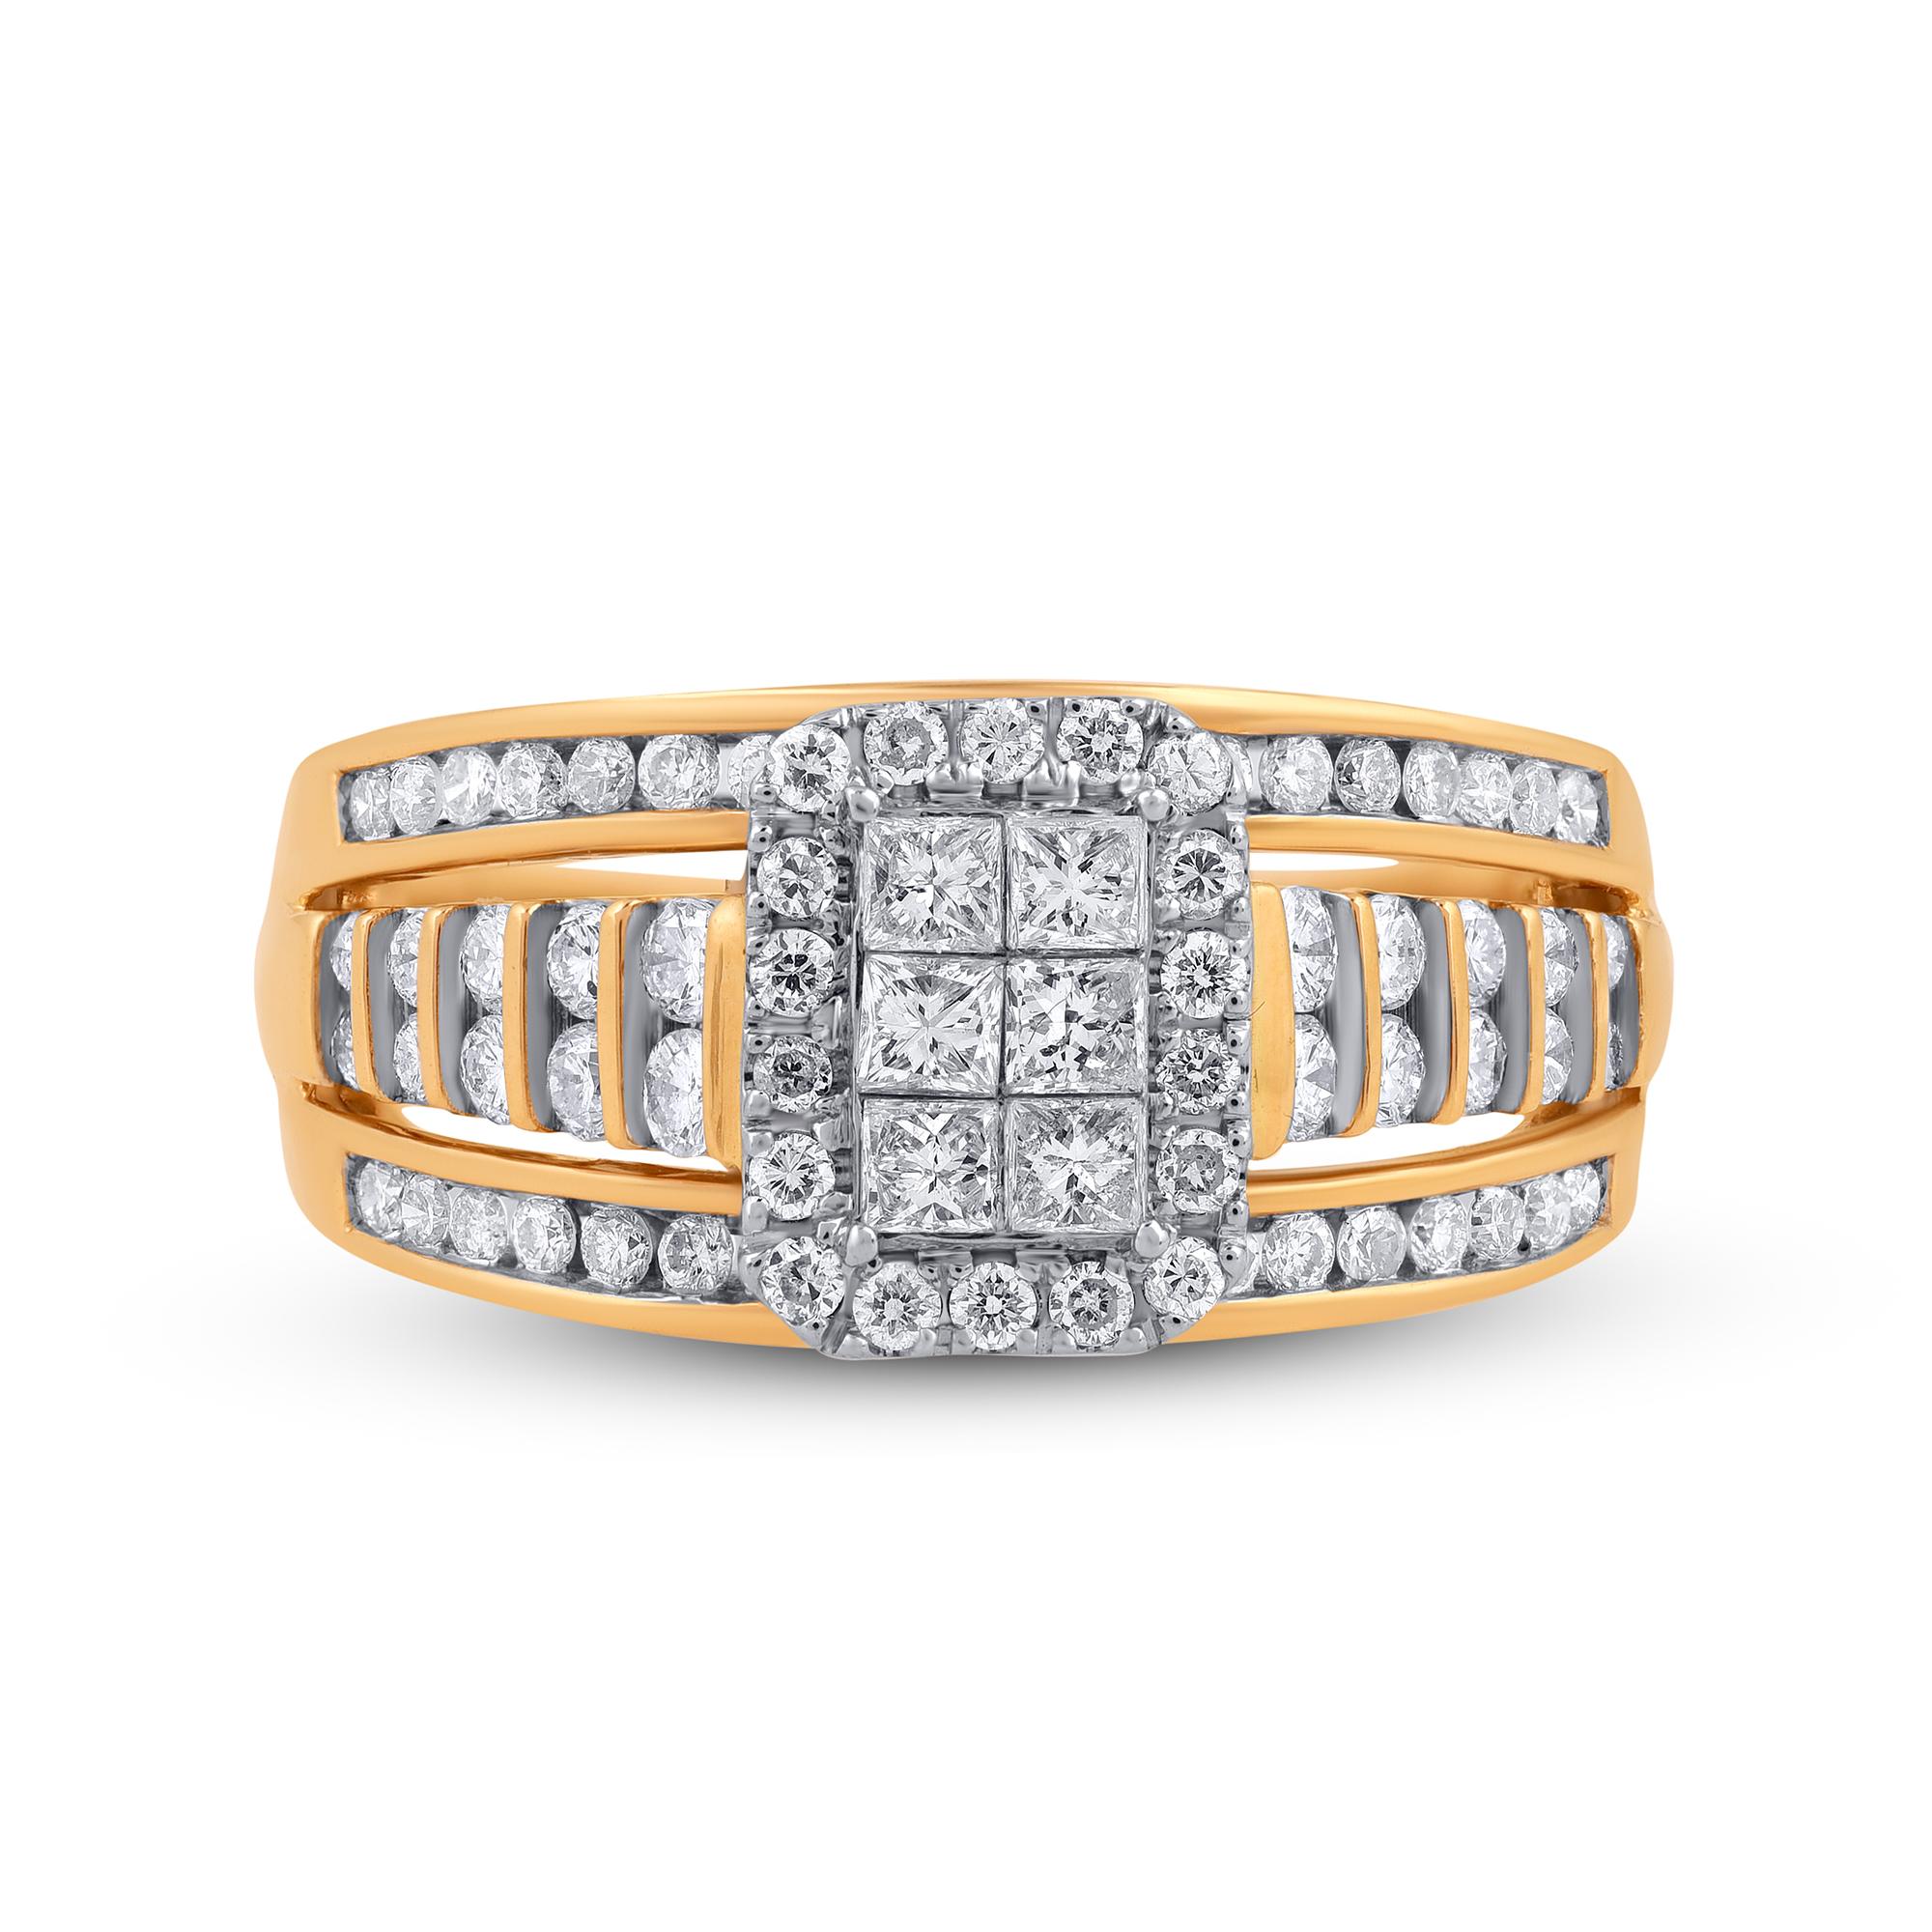 Stunning and classic, this diamond ring is beautifully crafted in 14KT Solid yellow gold. This band is studded with sparkling 78 round brilliant cut and princess-cut white diamonds in secured channel & pave setting. The diamonds are natural,